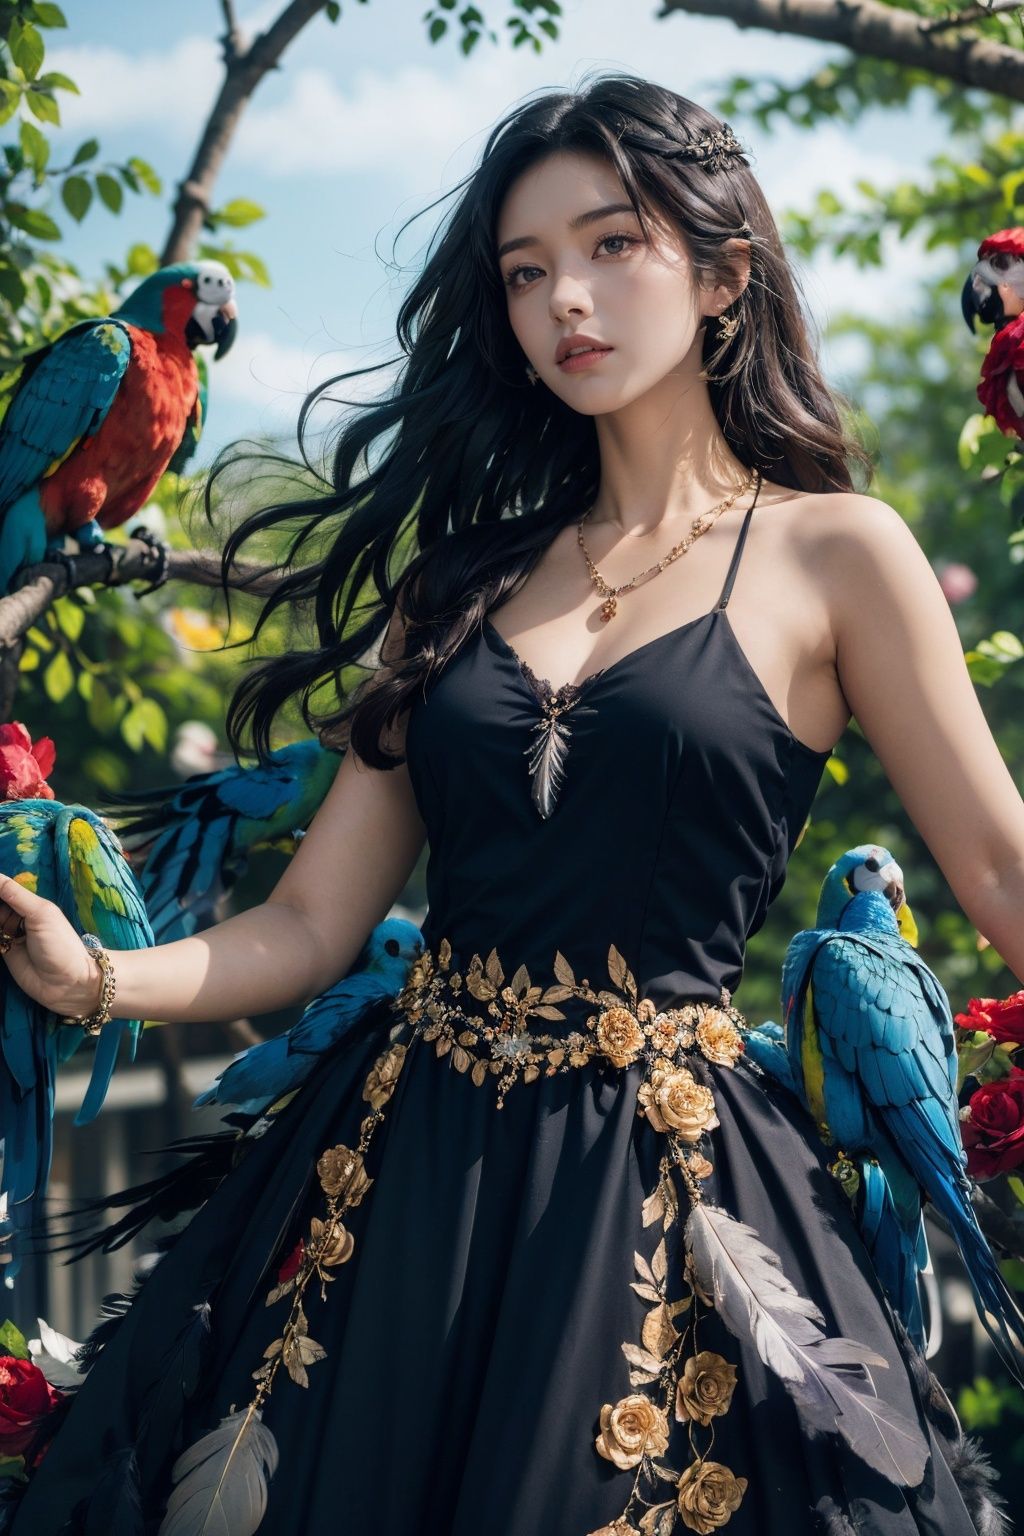 1 girl (surrounded by parrots), necklace, black hair, black long hair, flowers, branches, solo, long hair, feathered dress, floating feathers, black feathers, brown hair, parrots, foreground blocking, depth of field, looking at the audience, dynamic posture, realistic, rose,